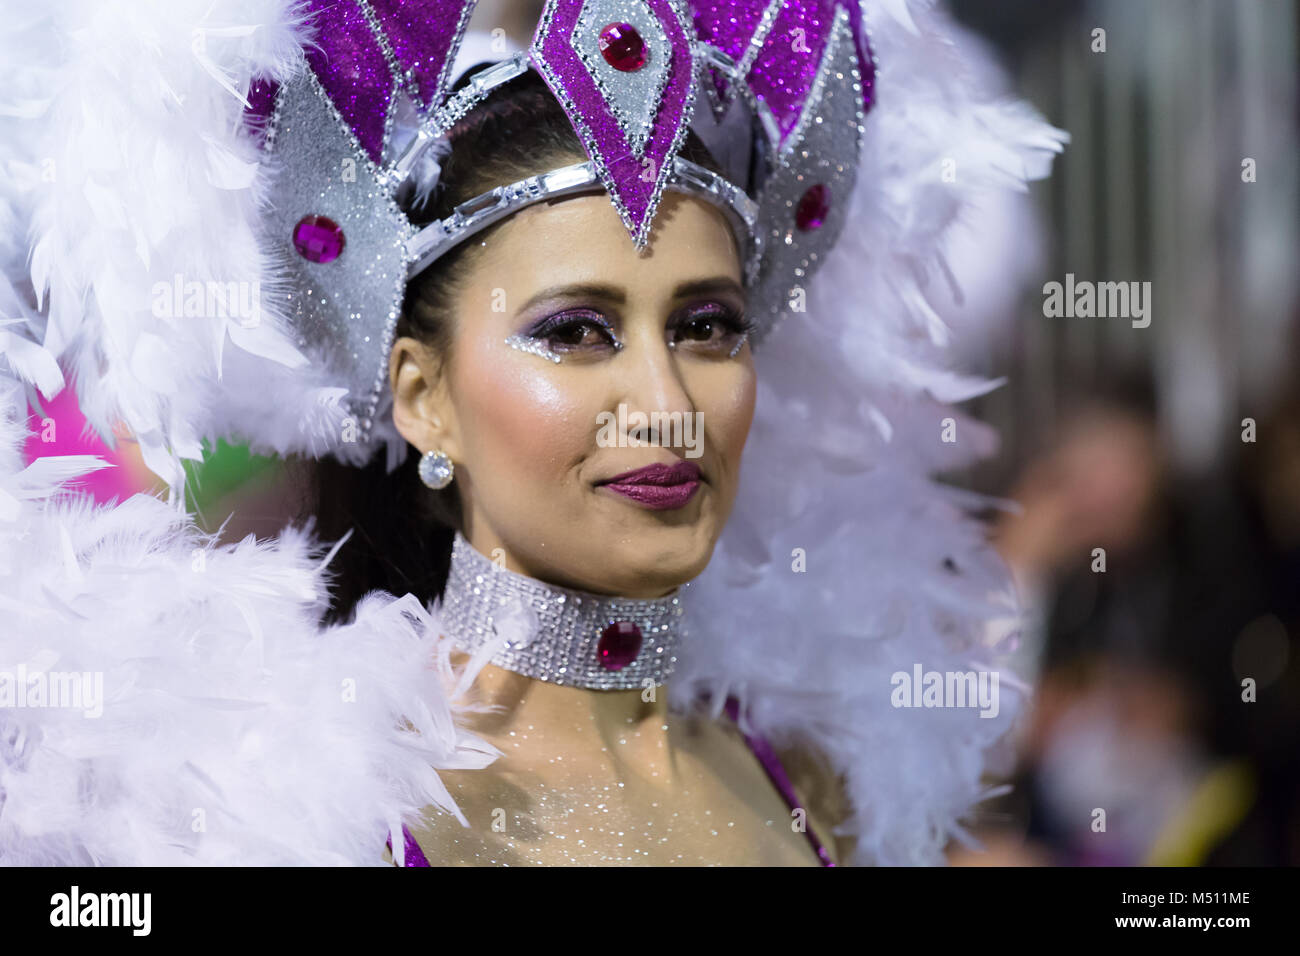 FUNCHAL, PORTUGAL - FEBRUARY 9, 2018: Participants of the Madeira Island Carnival dancing in the parade in Funchal city, Madeira, Portugal. Stock Photo